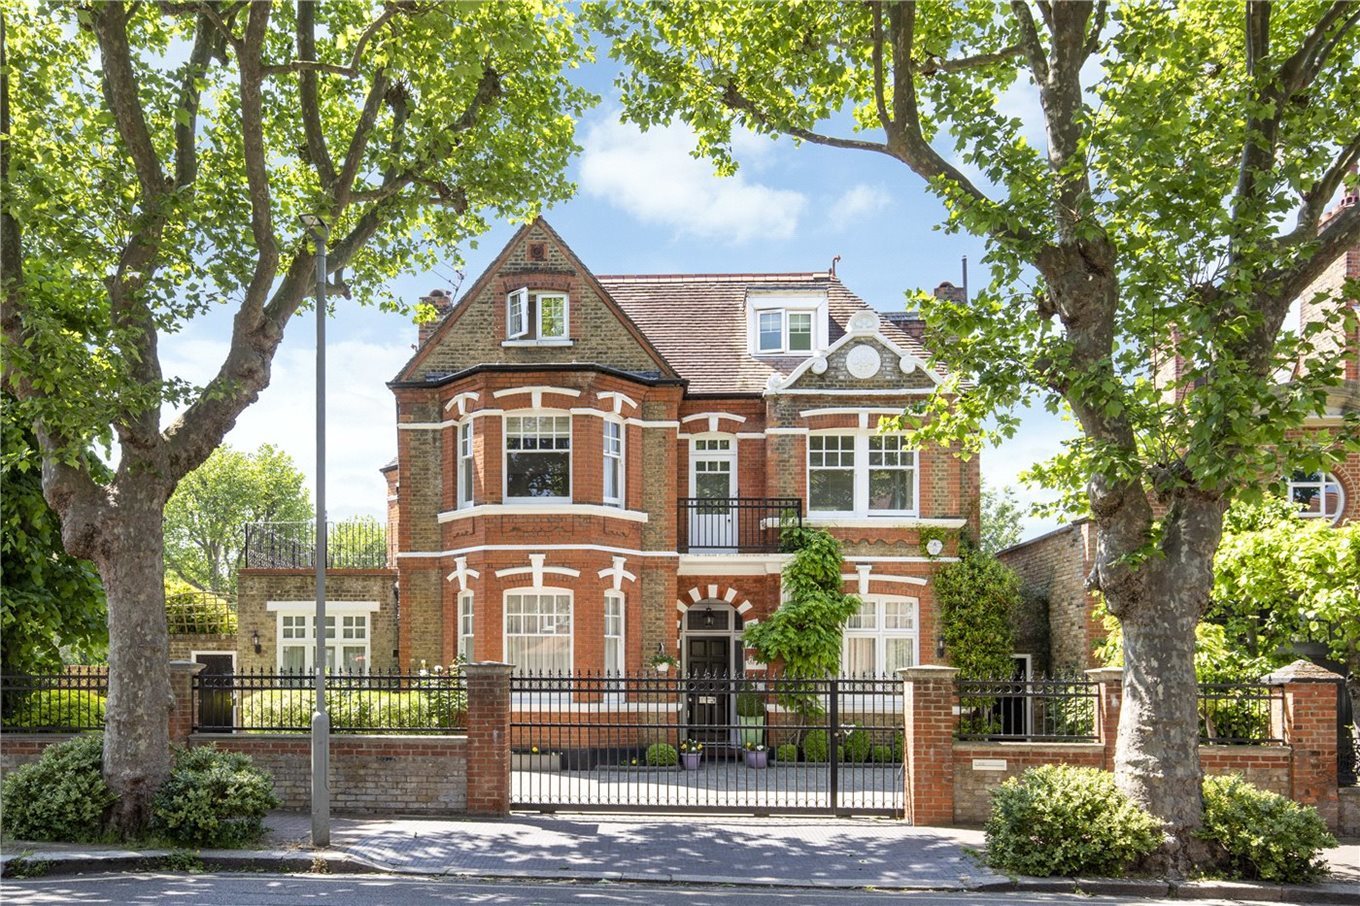 £5,950,000 mortgage for client buying home in prime central London 